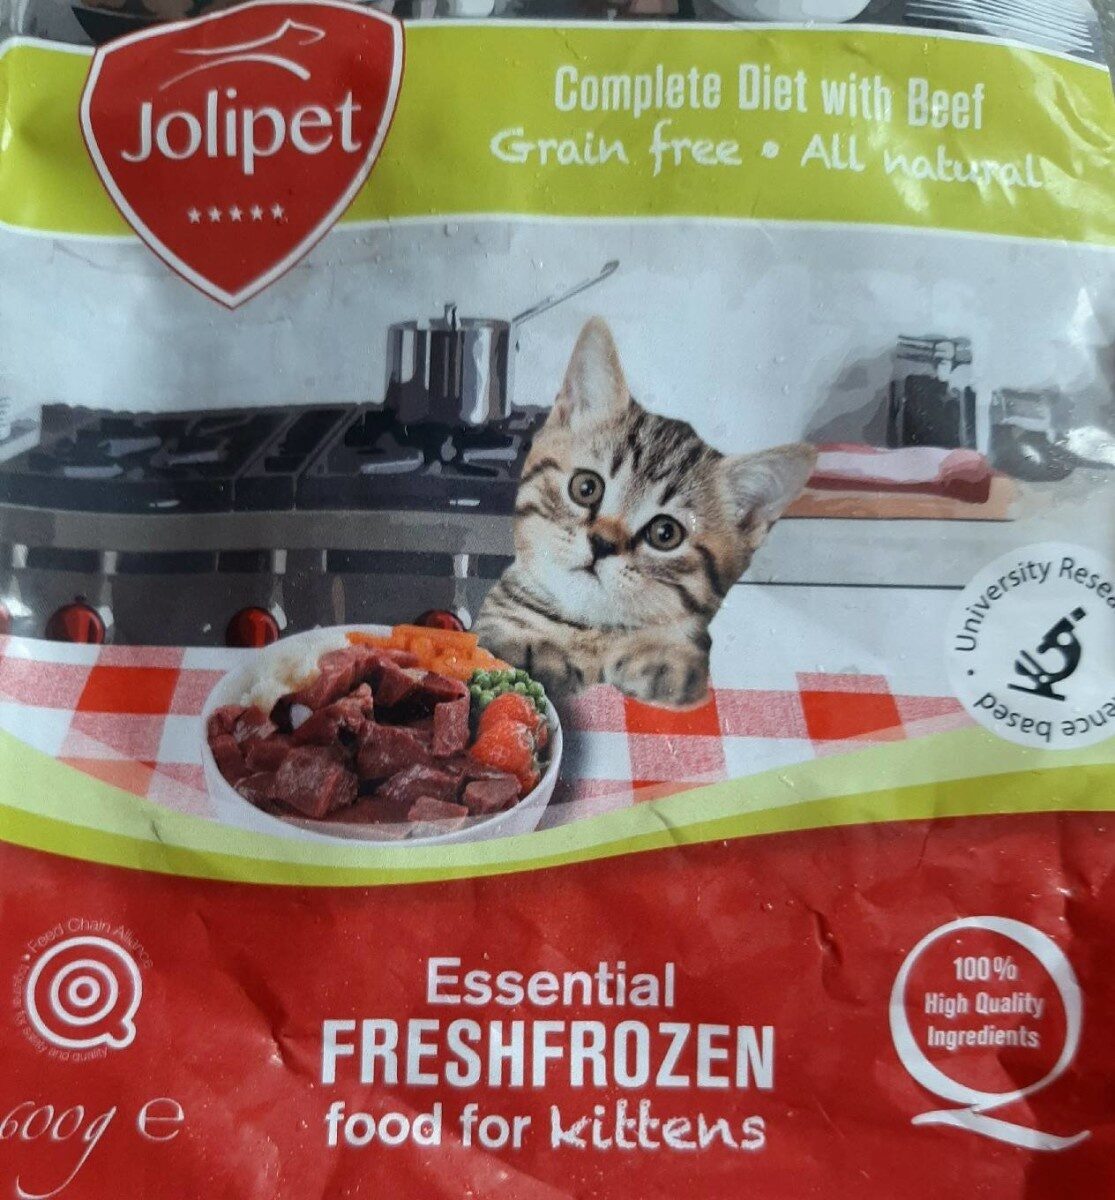 Essential fresh frozen food for kittens - Product - fr